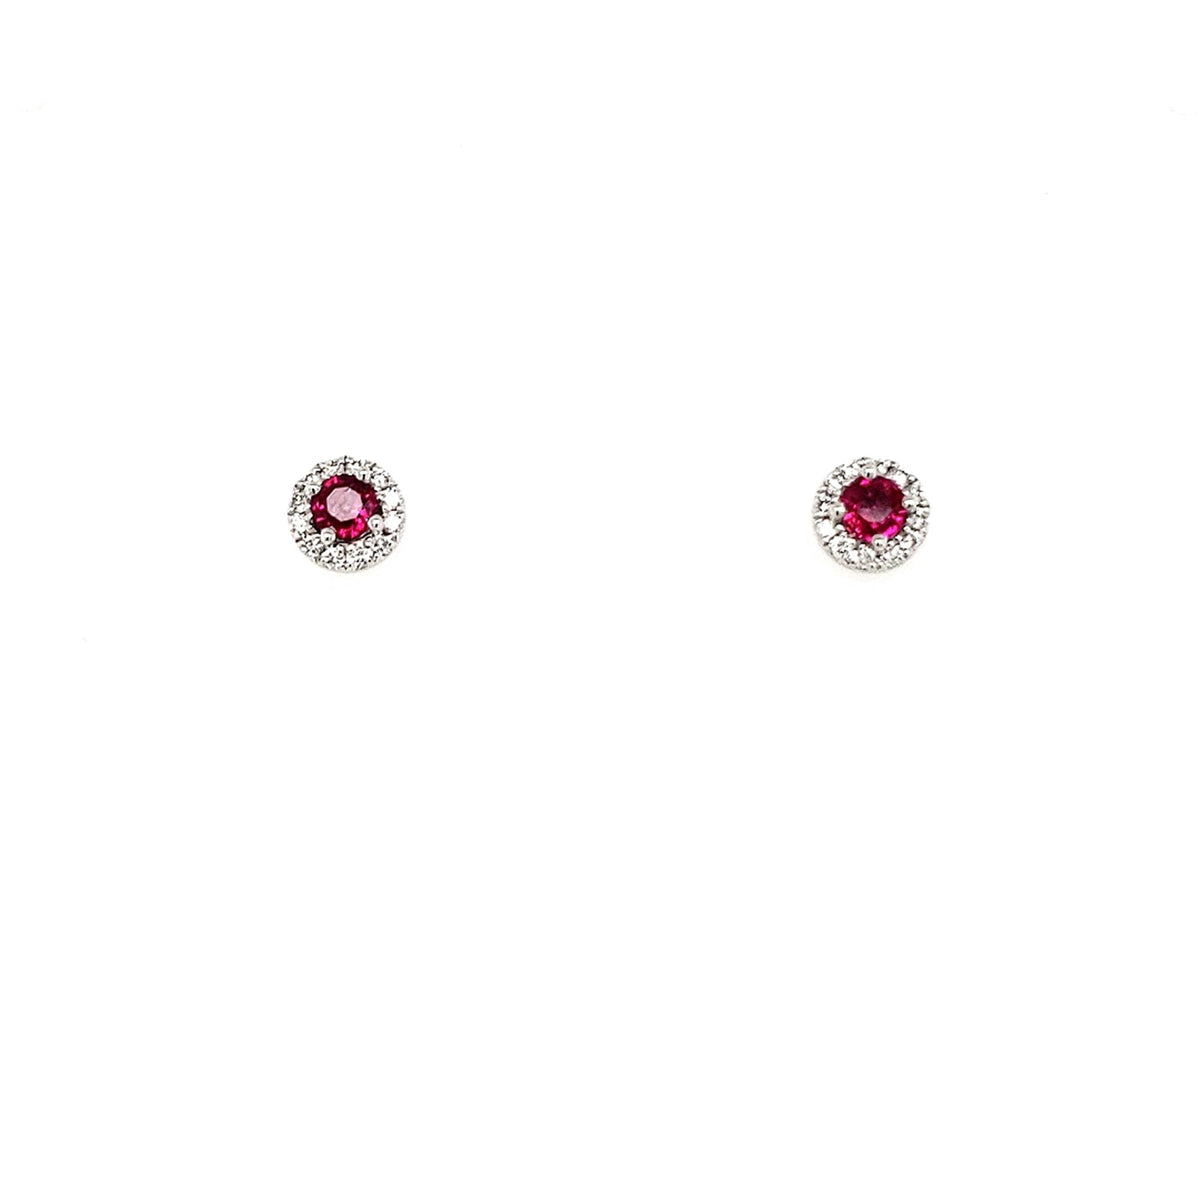 18Kt White Gold Halo Earrings Gemstone Earrings With 0.29ct Rubies